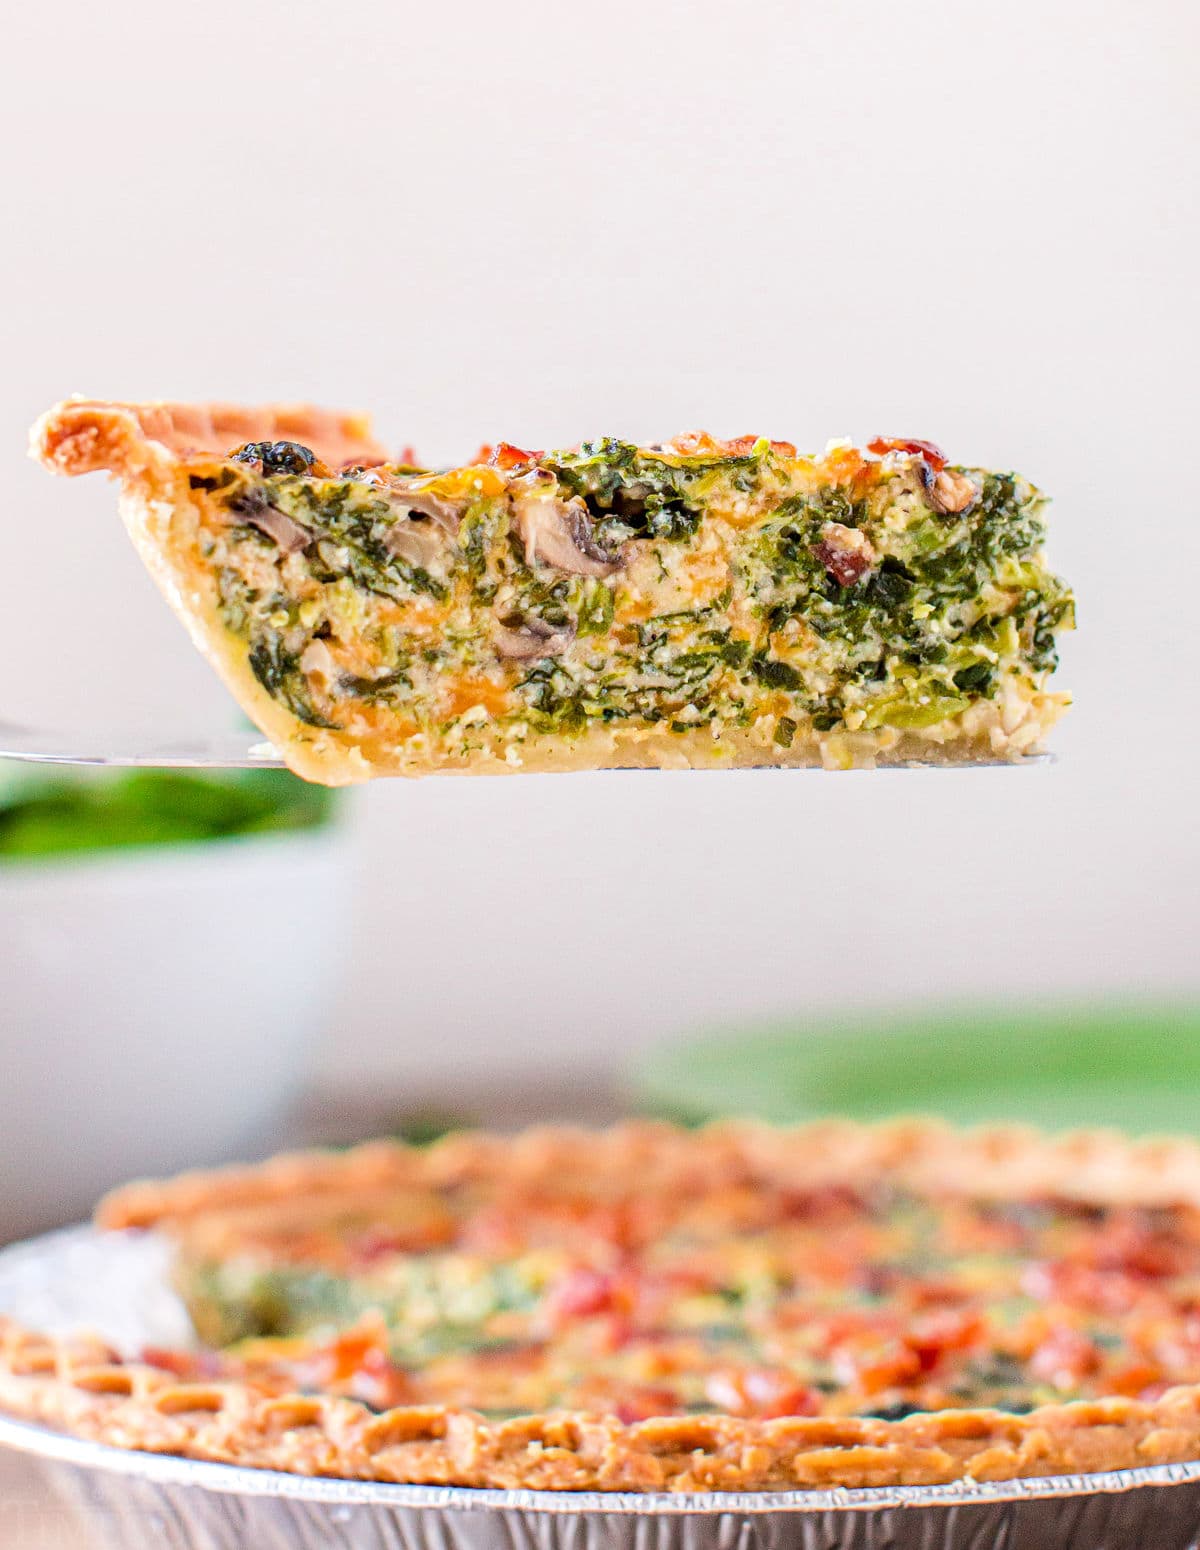 slice of spinach mushroom quiche held up over pie plate.